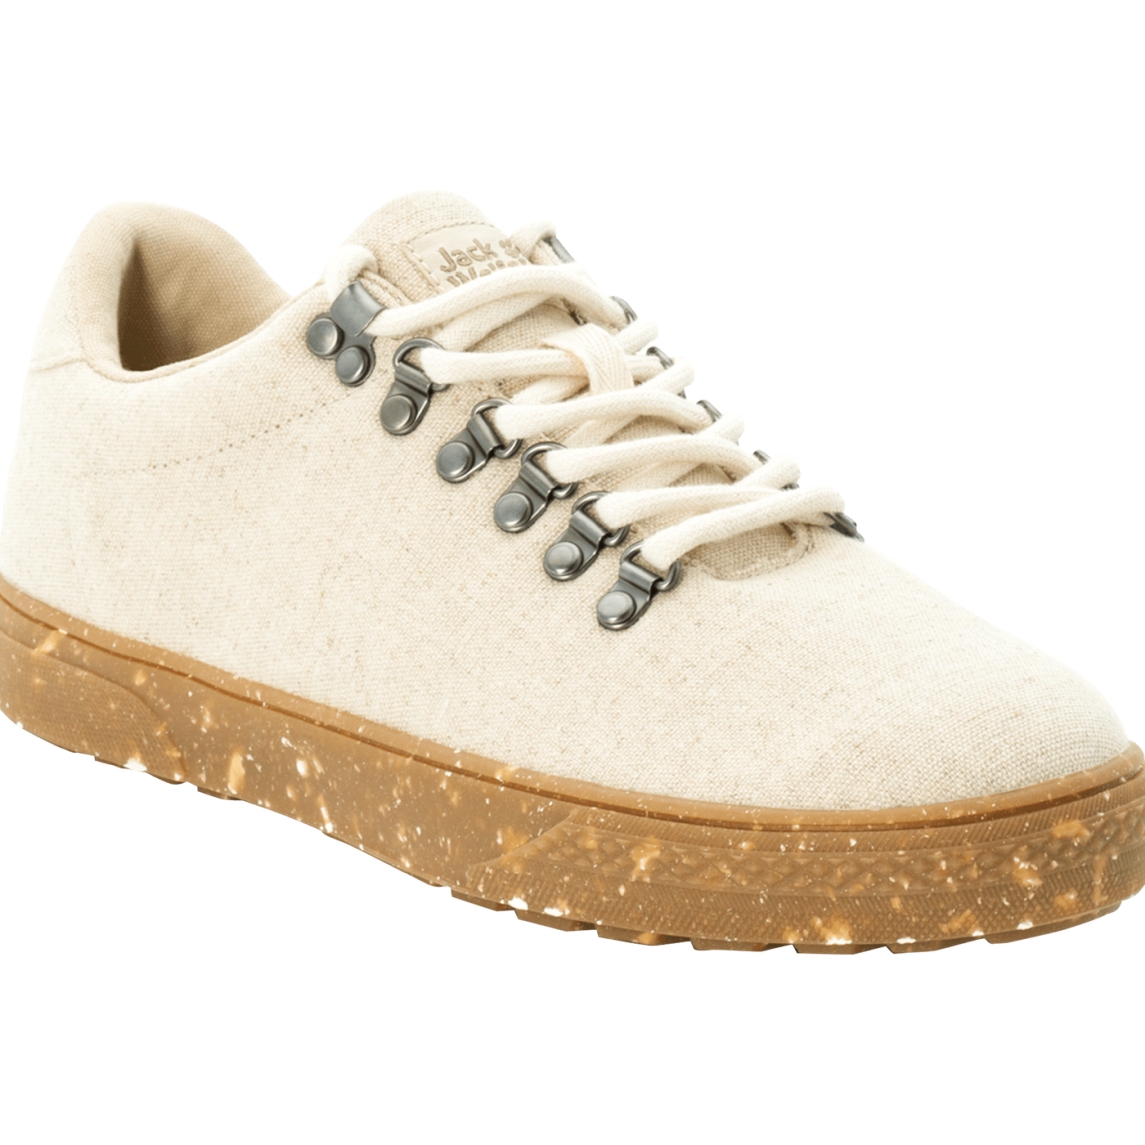 Image of Jack Wolfskin Ecostride 3 Low Shoes Women - natural / cork